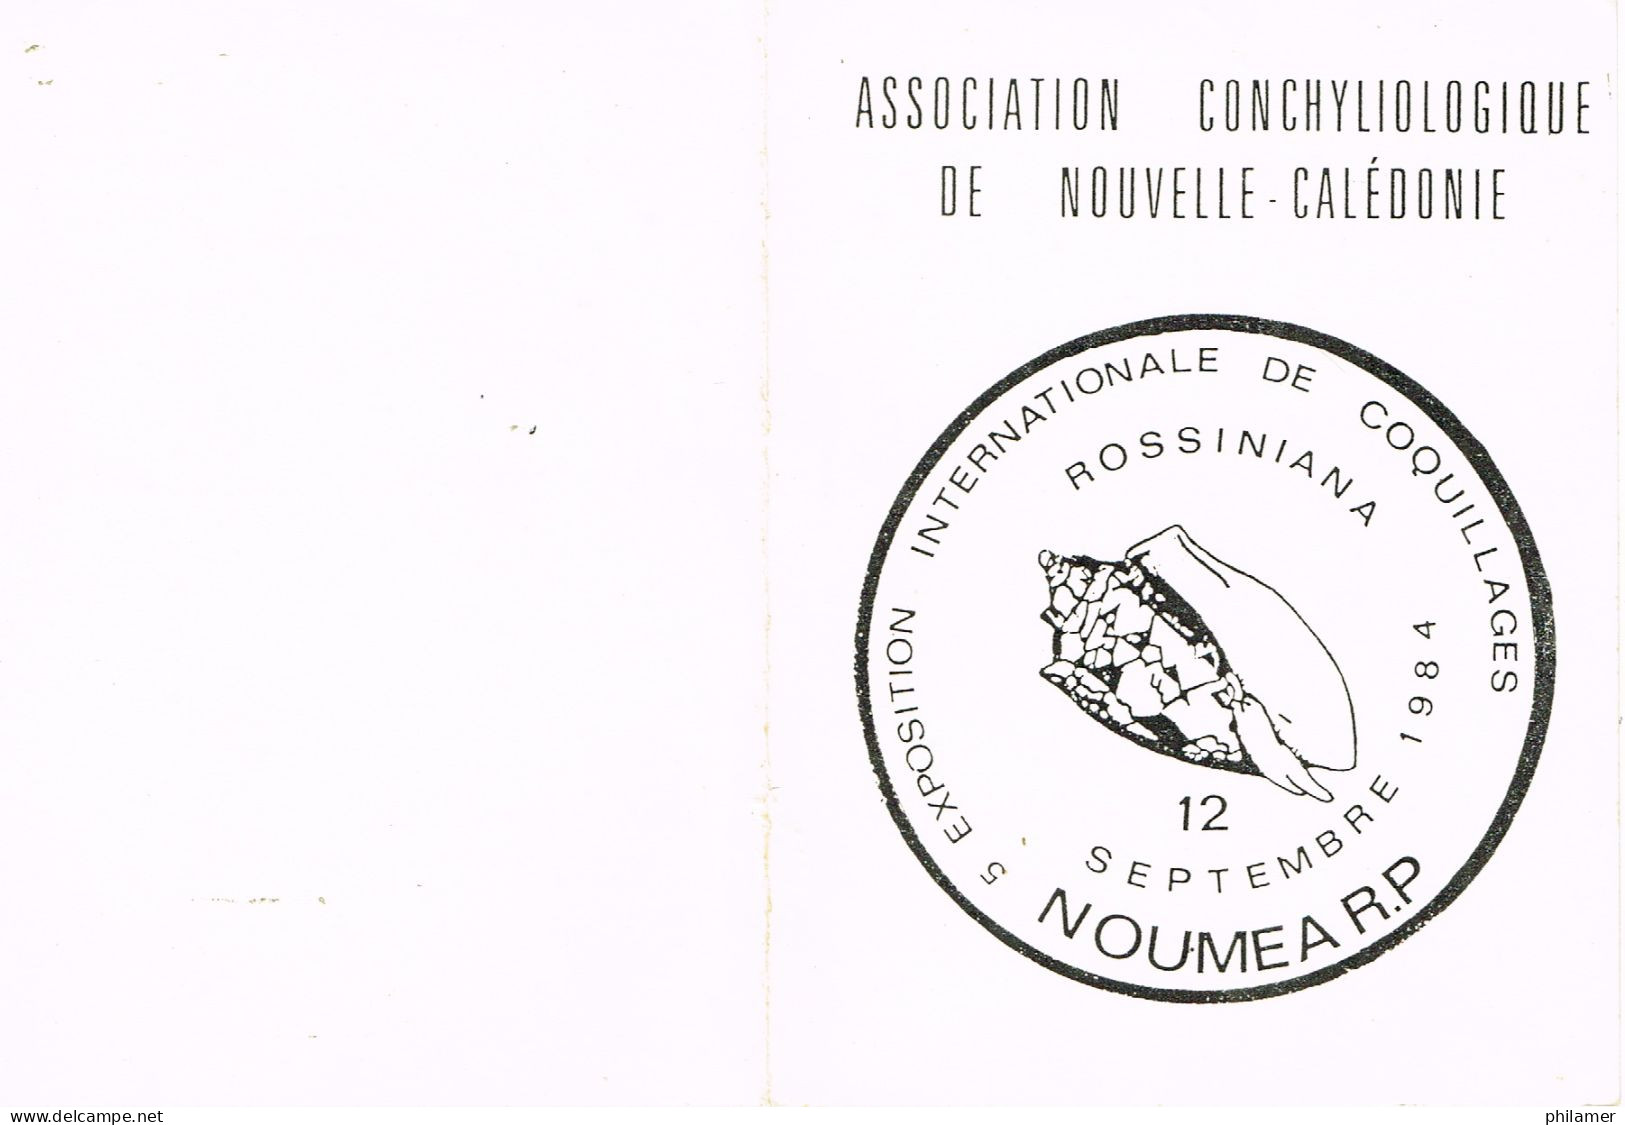 NOUVELLE CALEDONIE CALEDONIA Cad Handstamped Cachet Commemoratif Exposition Coquillages Rossiniana 12/09/84 BE - Cartas & Documentos